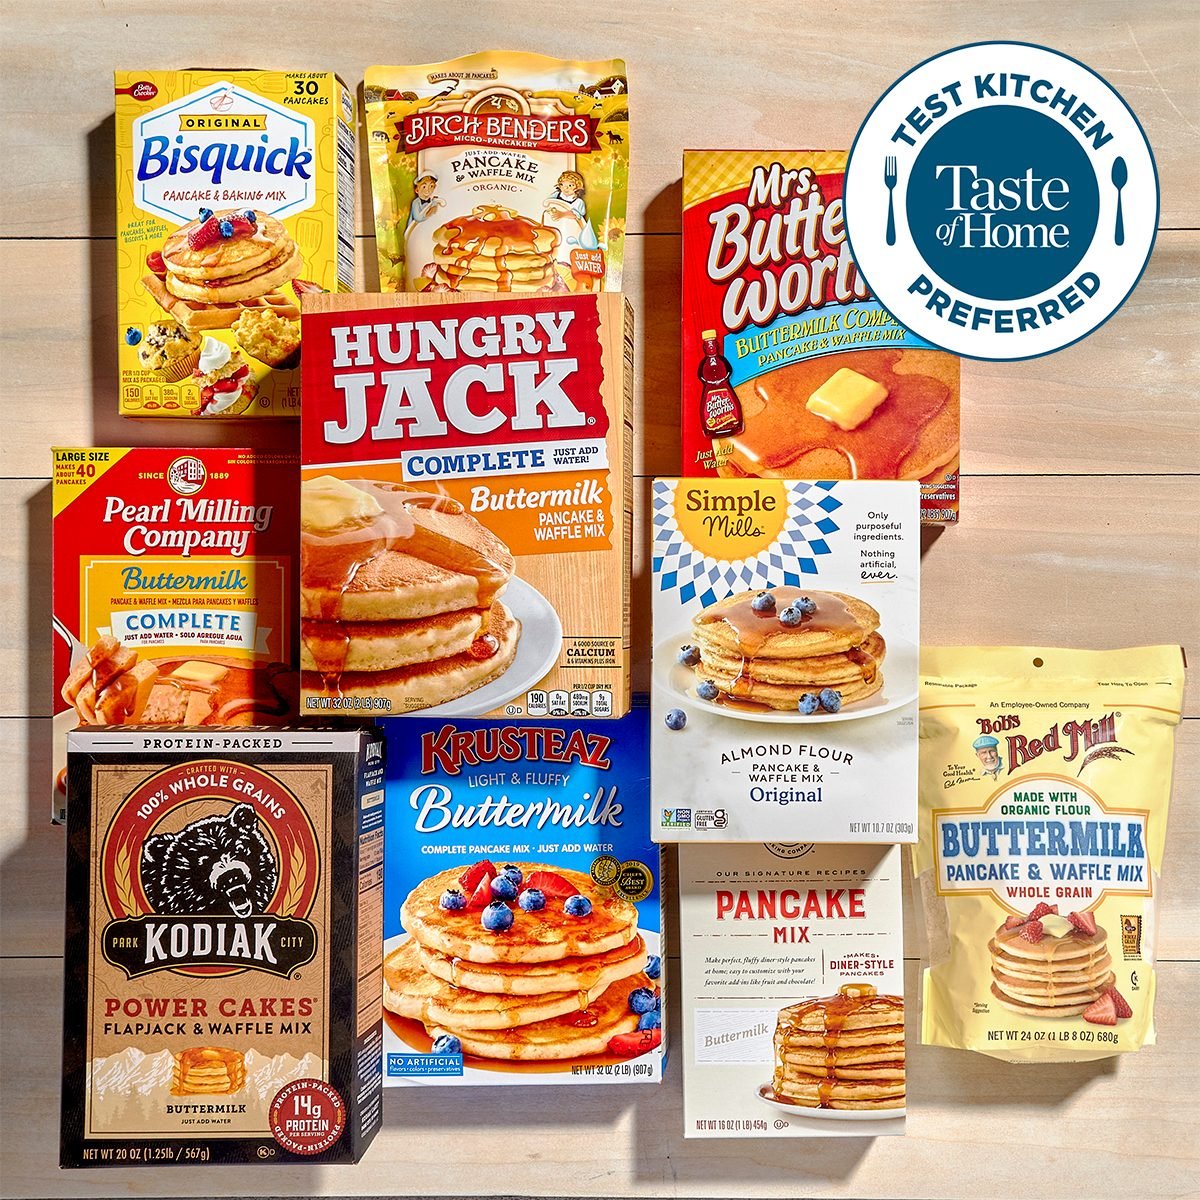 Experts Weigh In: The Best Pancake Mix According to a Blind Taste Test